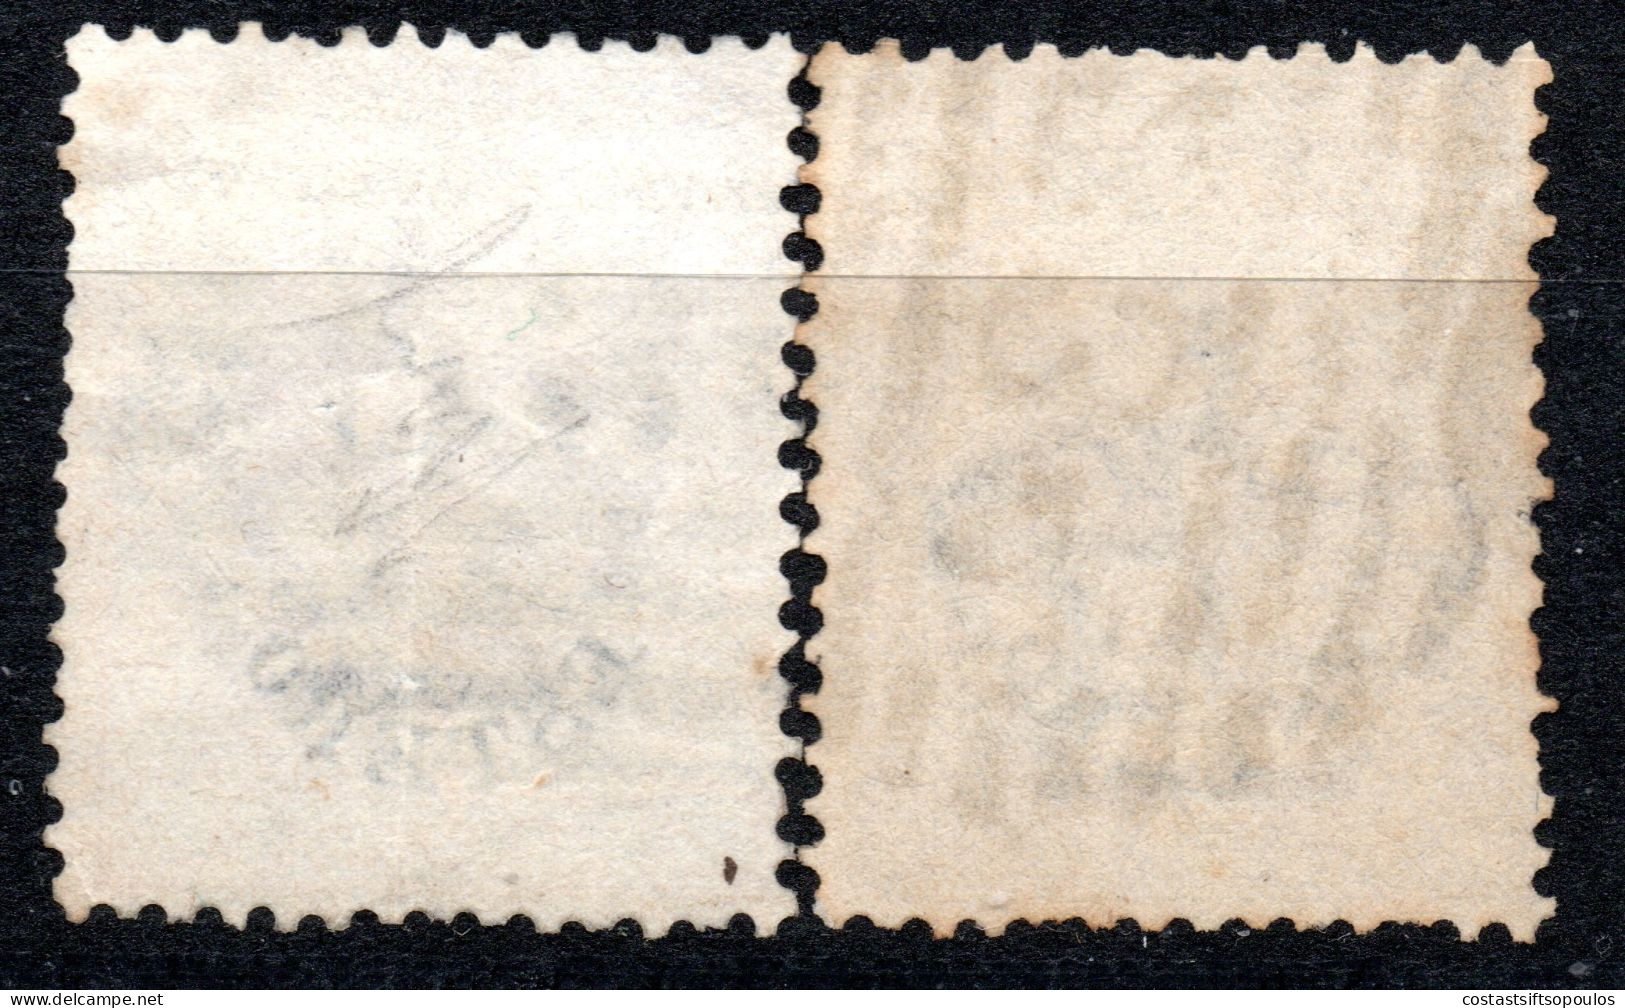 3116. EGYPT ITALY LEVANT 1874-1878 234 ALEXANDRIA POSTMARKS - General Issues